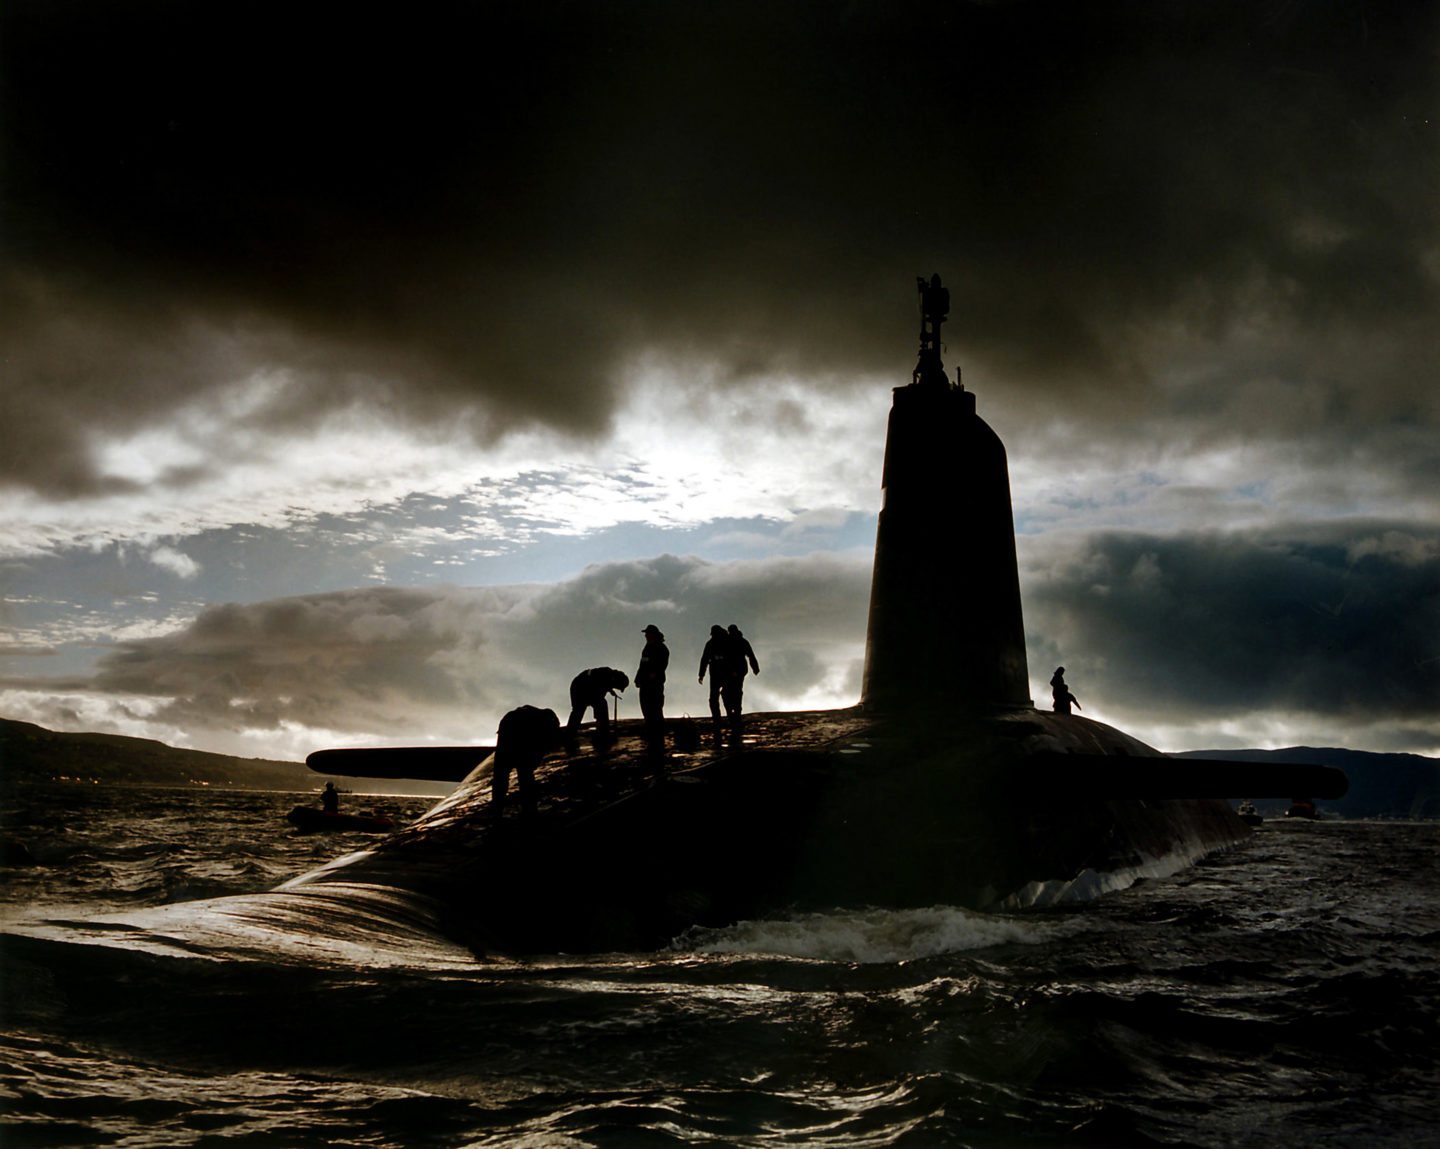 Trident damned as 'deadly farce' after costs rise £1bn